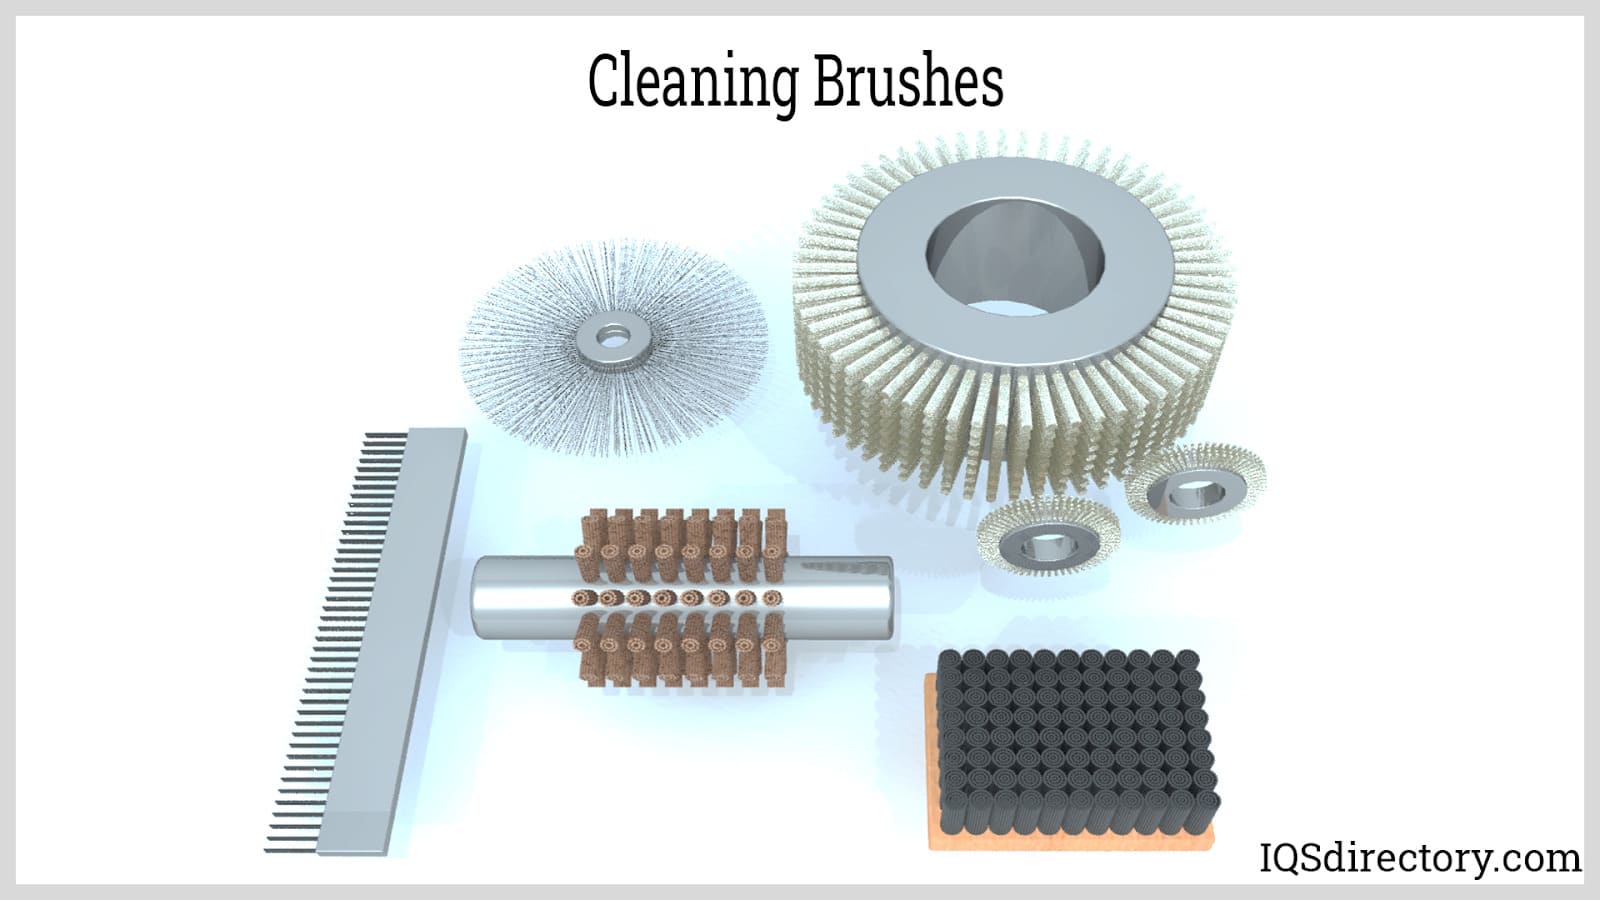 Lab Glassware Cleaning Brushes, Cleaning Brush Set